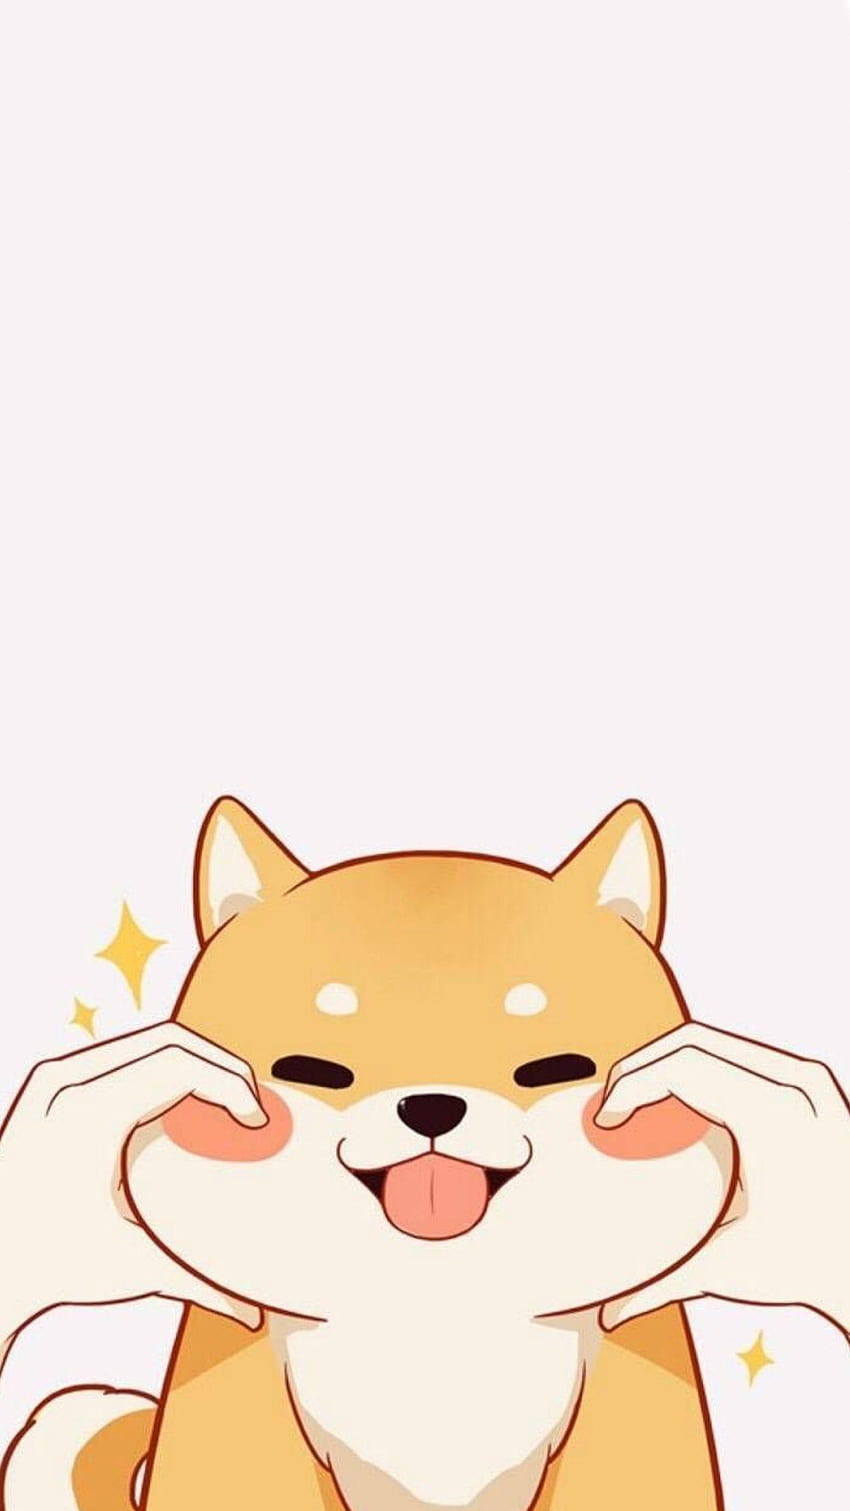 Just a Girl with her dog - Cute Corgi - anime style